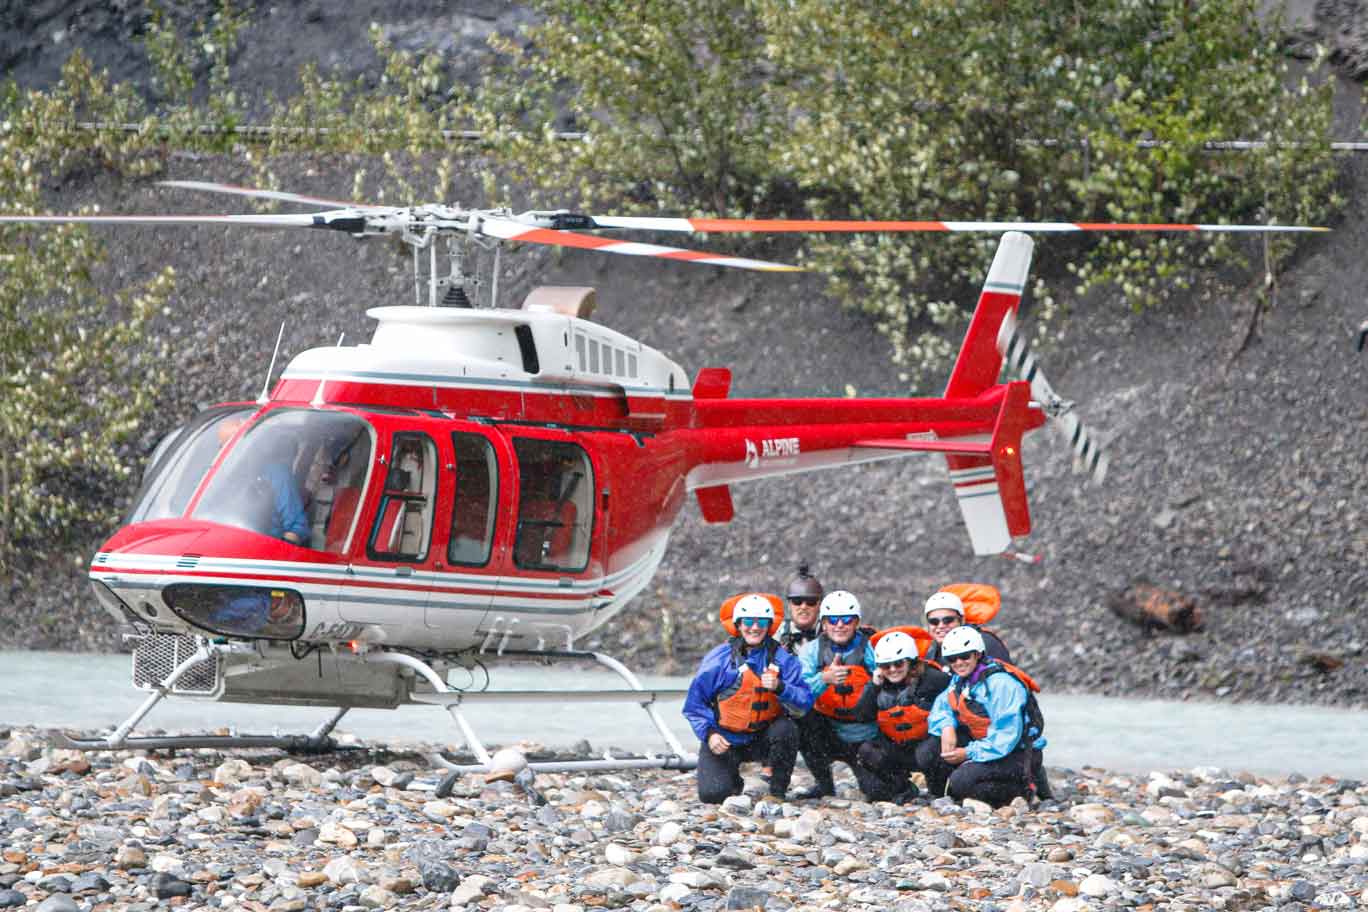 A group of rafters crouch near a helicopter, awaiting transport to the next section of river